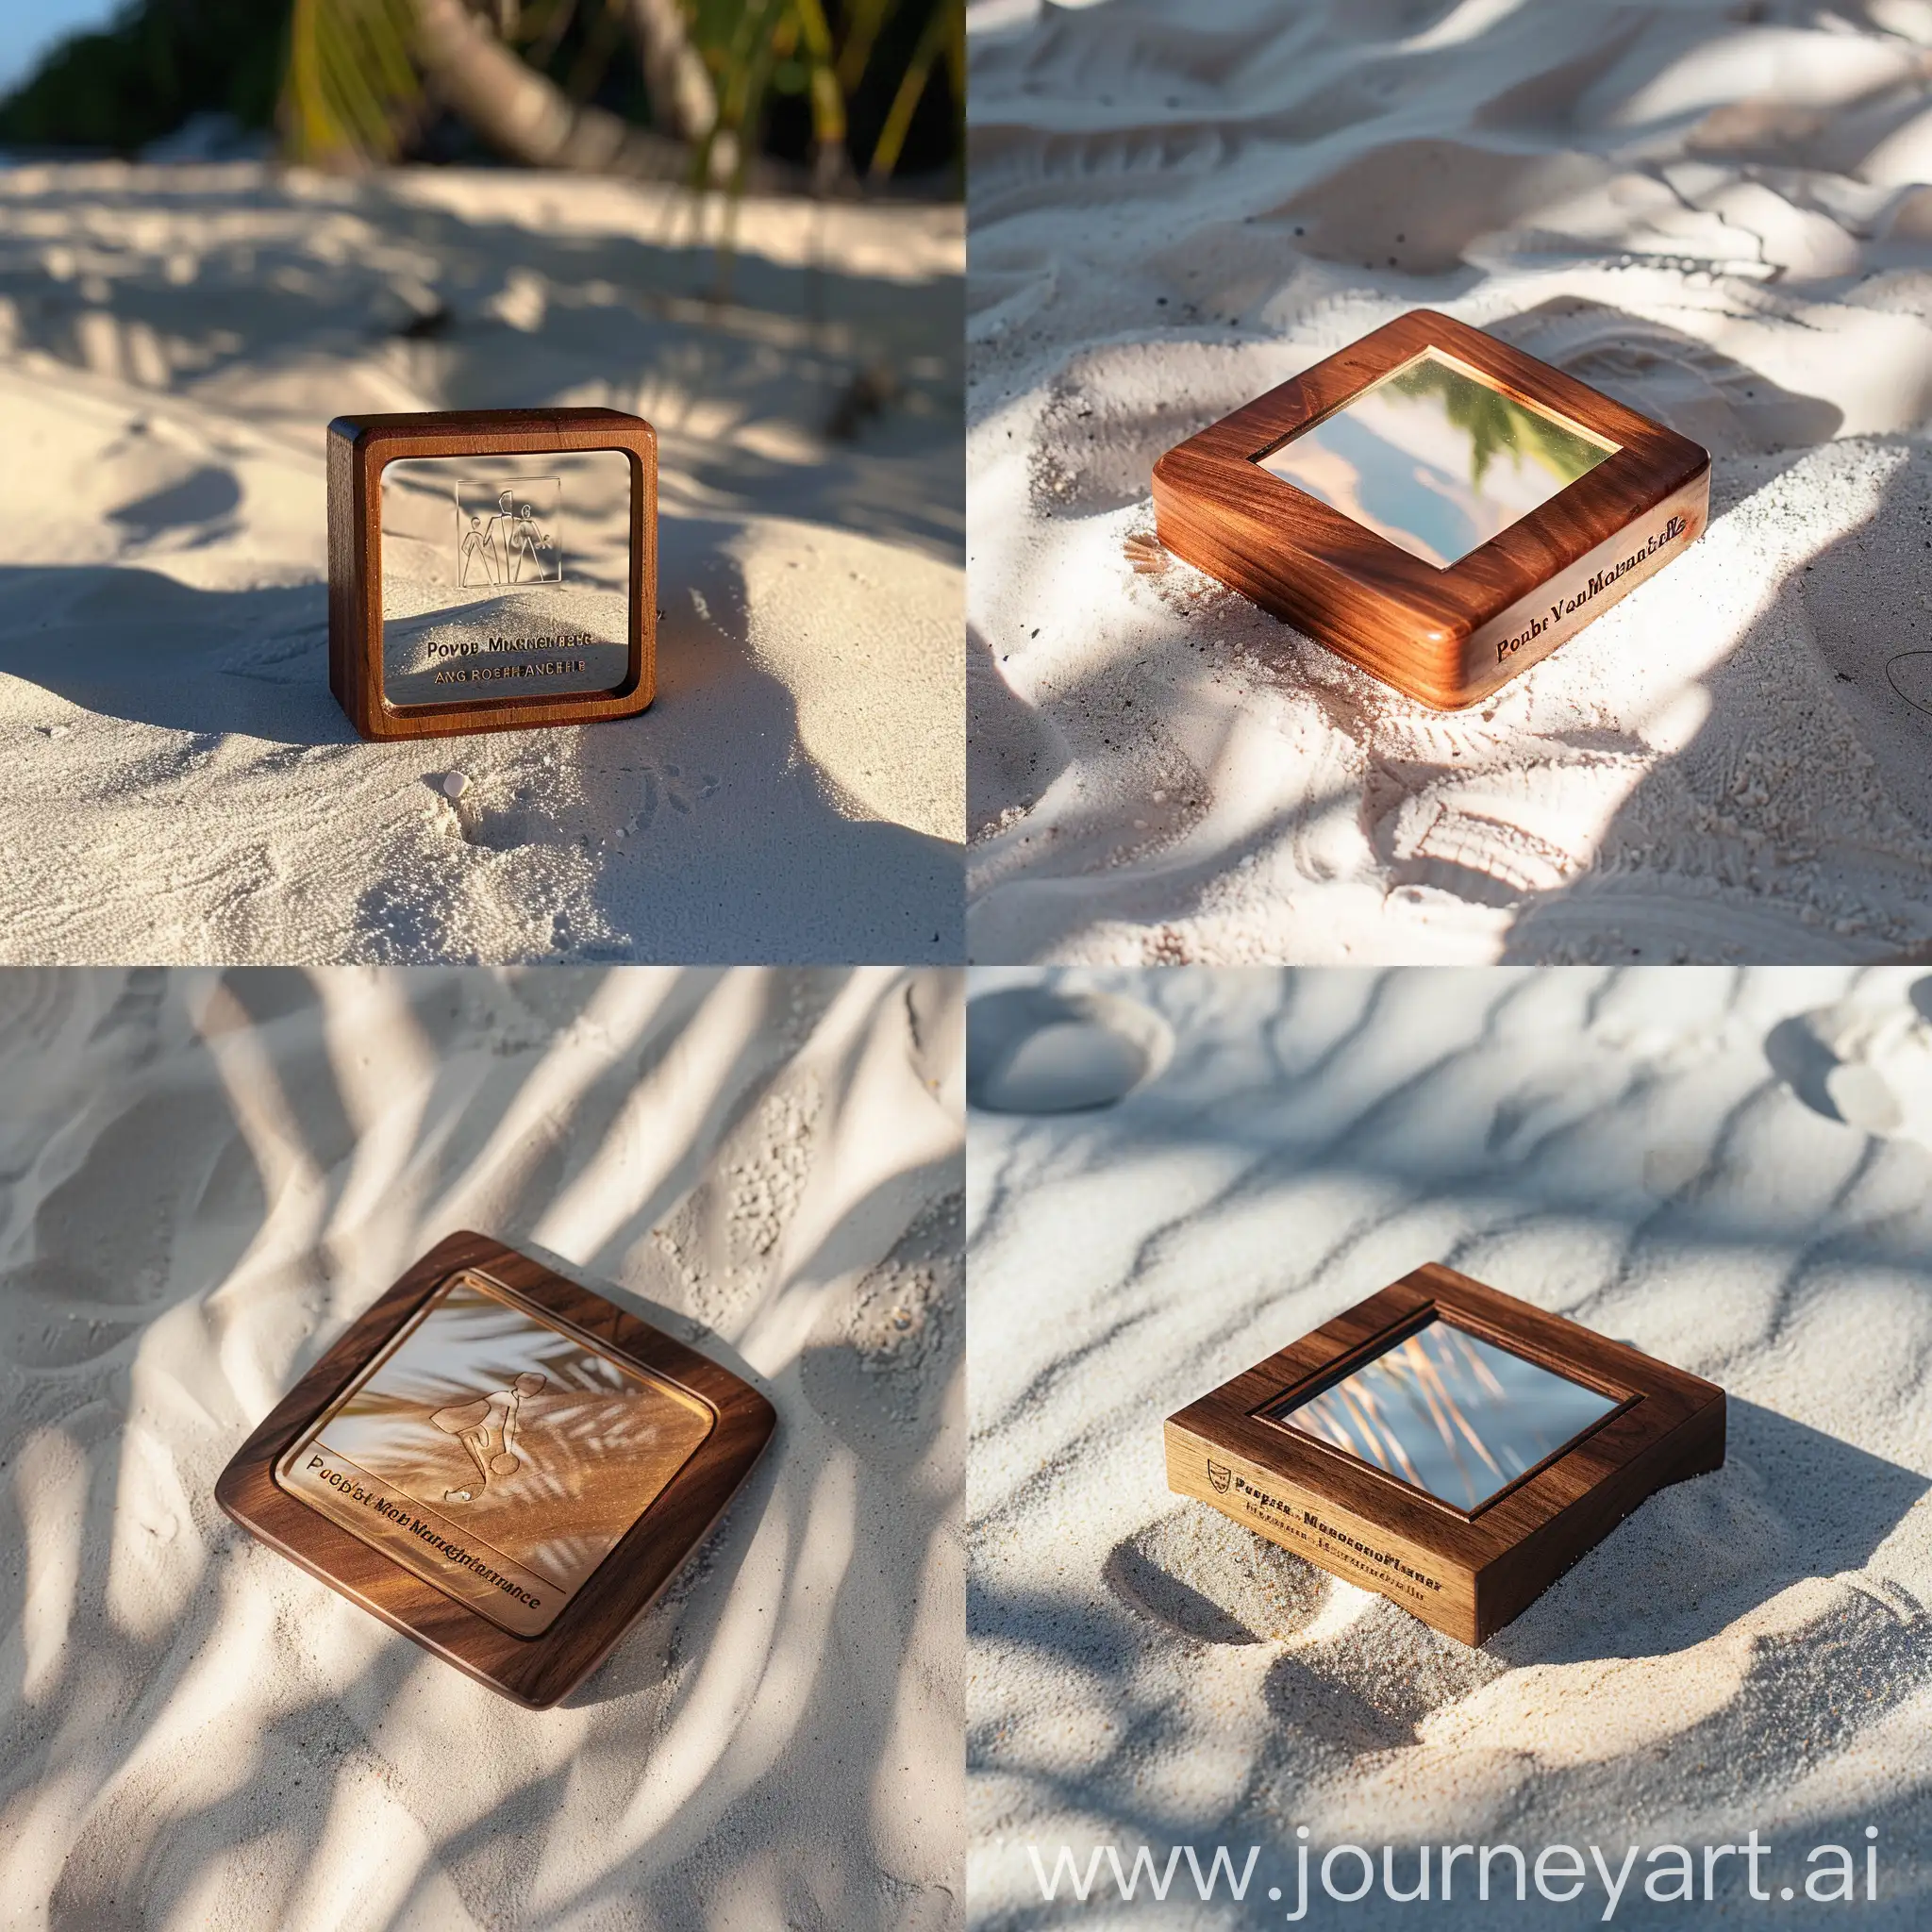 High quality, real life photography, square image with square mahogany-carved certification badge on a white sand beach, lit by the sun with subtle shadows. Zoom in on the badge. The text must be clearly visible. The badge has a carved image reflecting on the top, and straight, non-curved text with the name of the badge on the bottom. The badge is: People Management: Image is 3 people